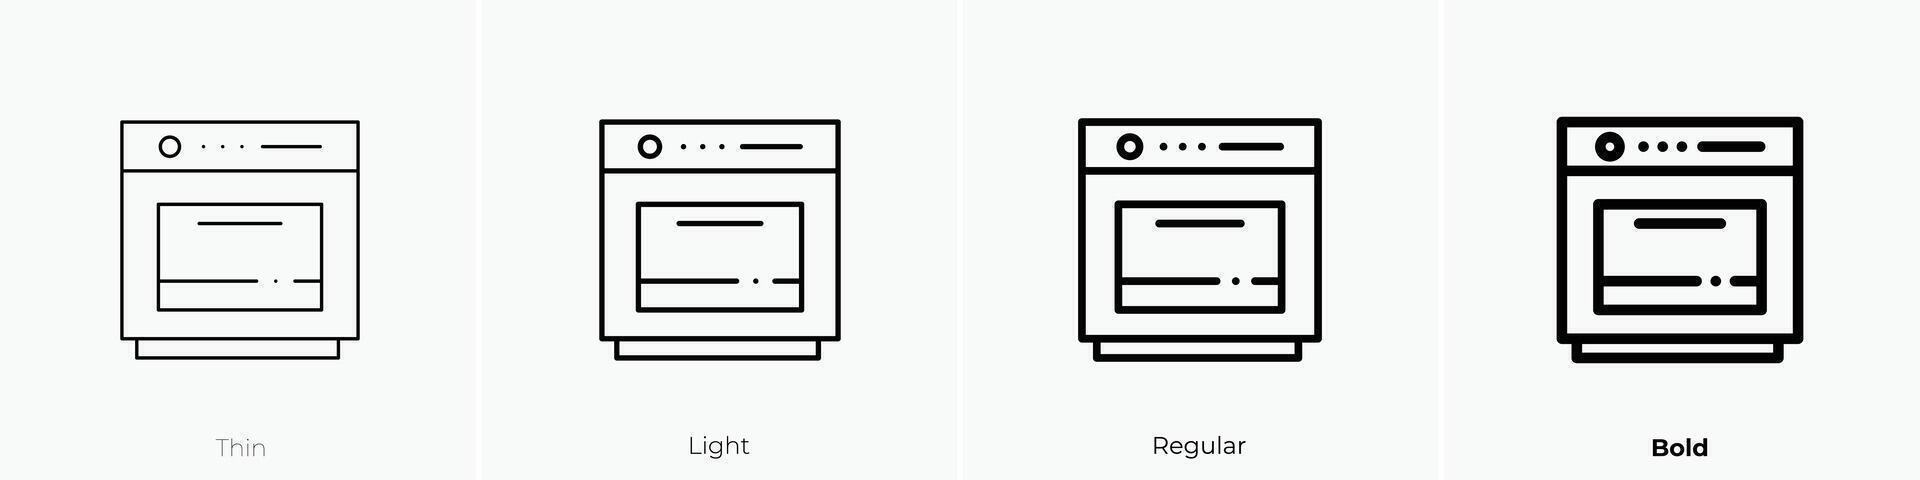 oven icon. Thin, Light, Regular And Bold style design isolated on white background vector